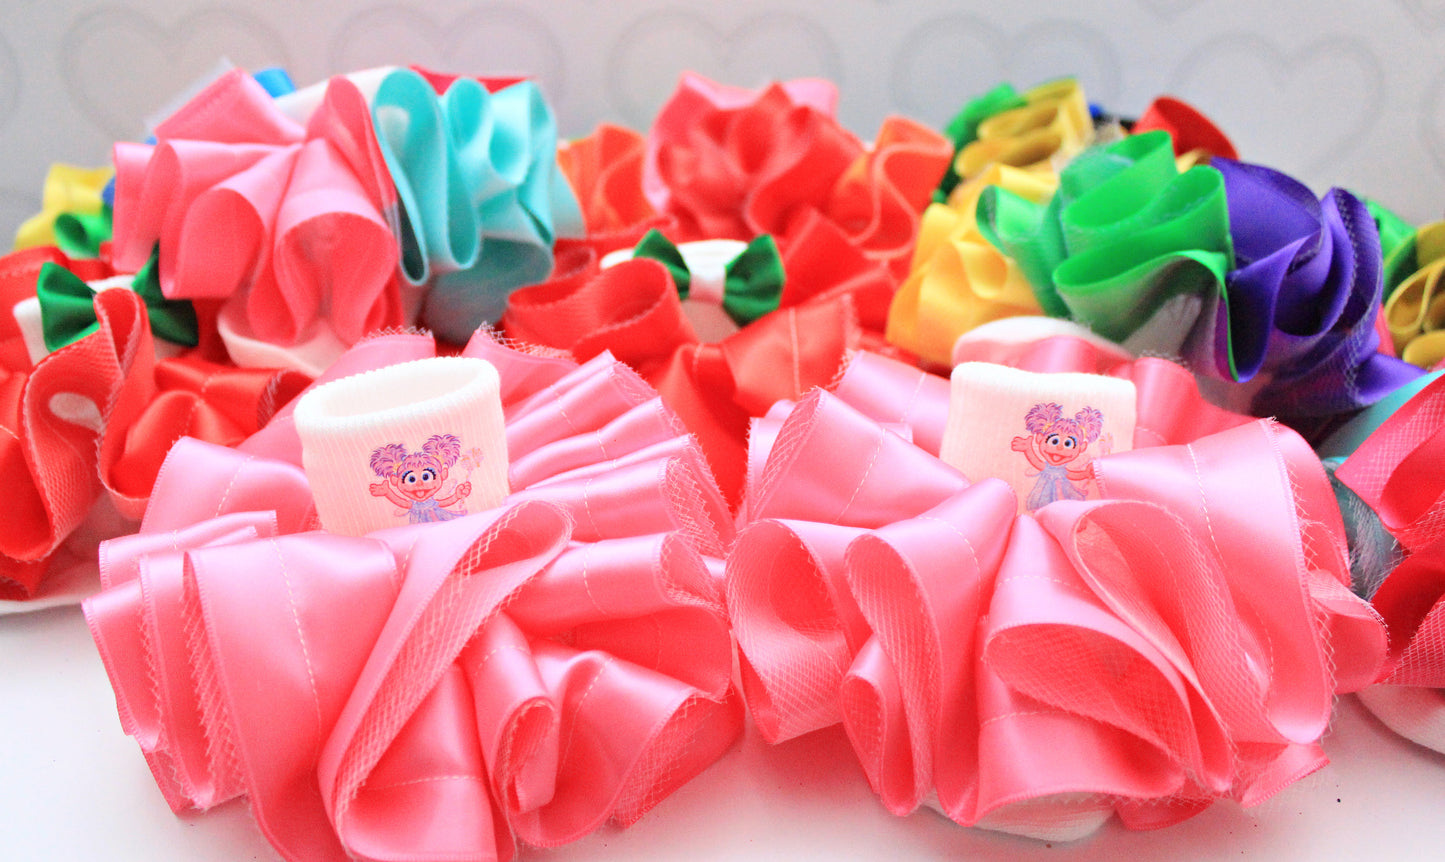 Ribbon Trim Tutu ruffle anklets-Tutu anklets-girls ribbon anklets- ADD ON TO EXISTING ORDER ONLY- NOT SOLD SEPARATE